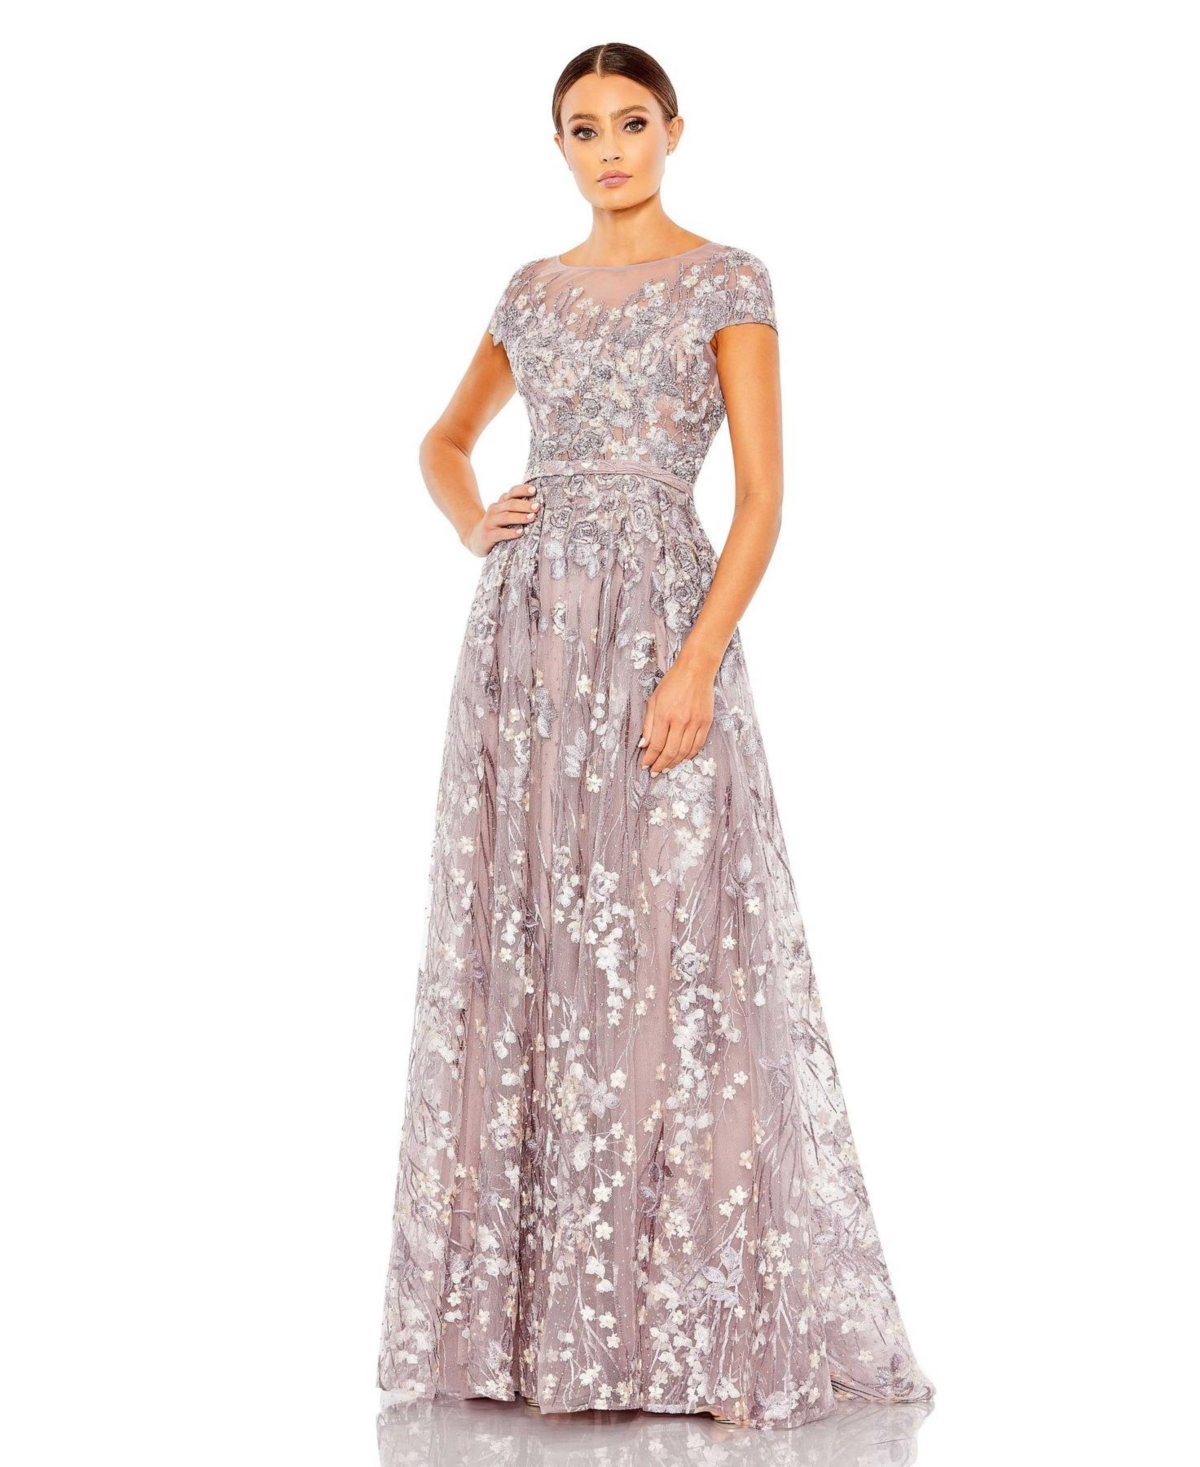 Women's Embellished Floral Cap Sleeve A Line Gown - Wisteria